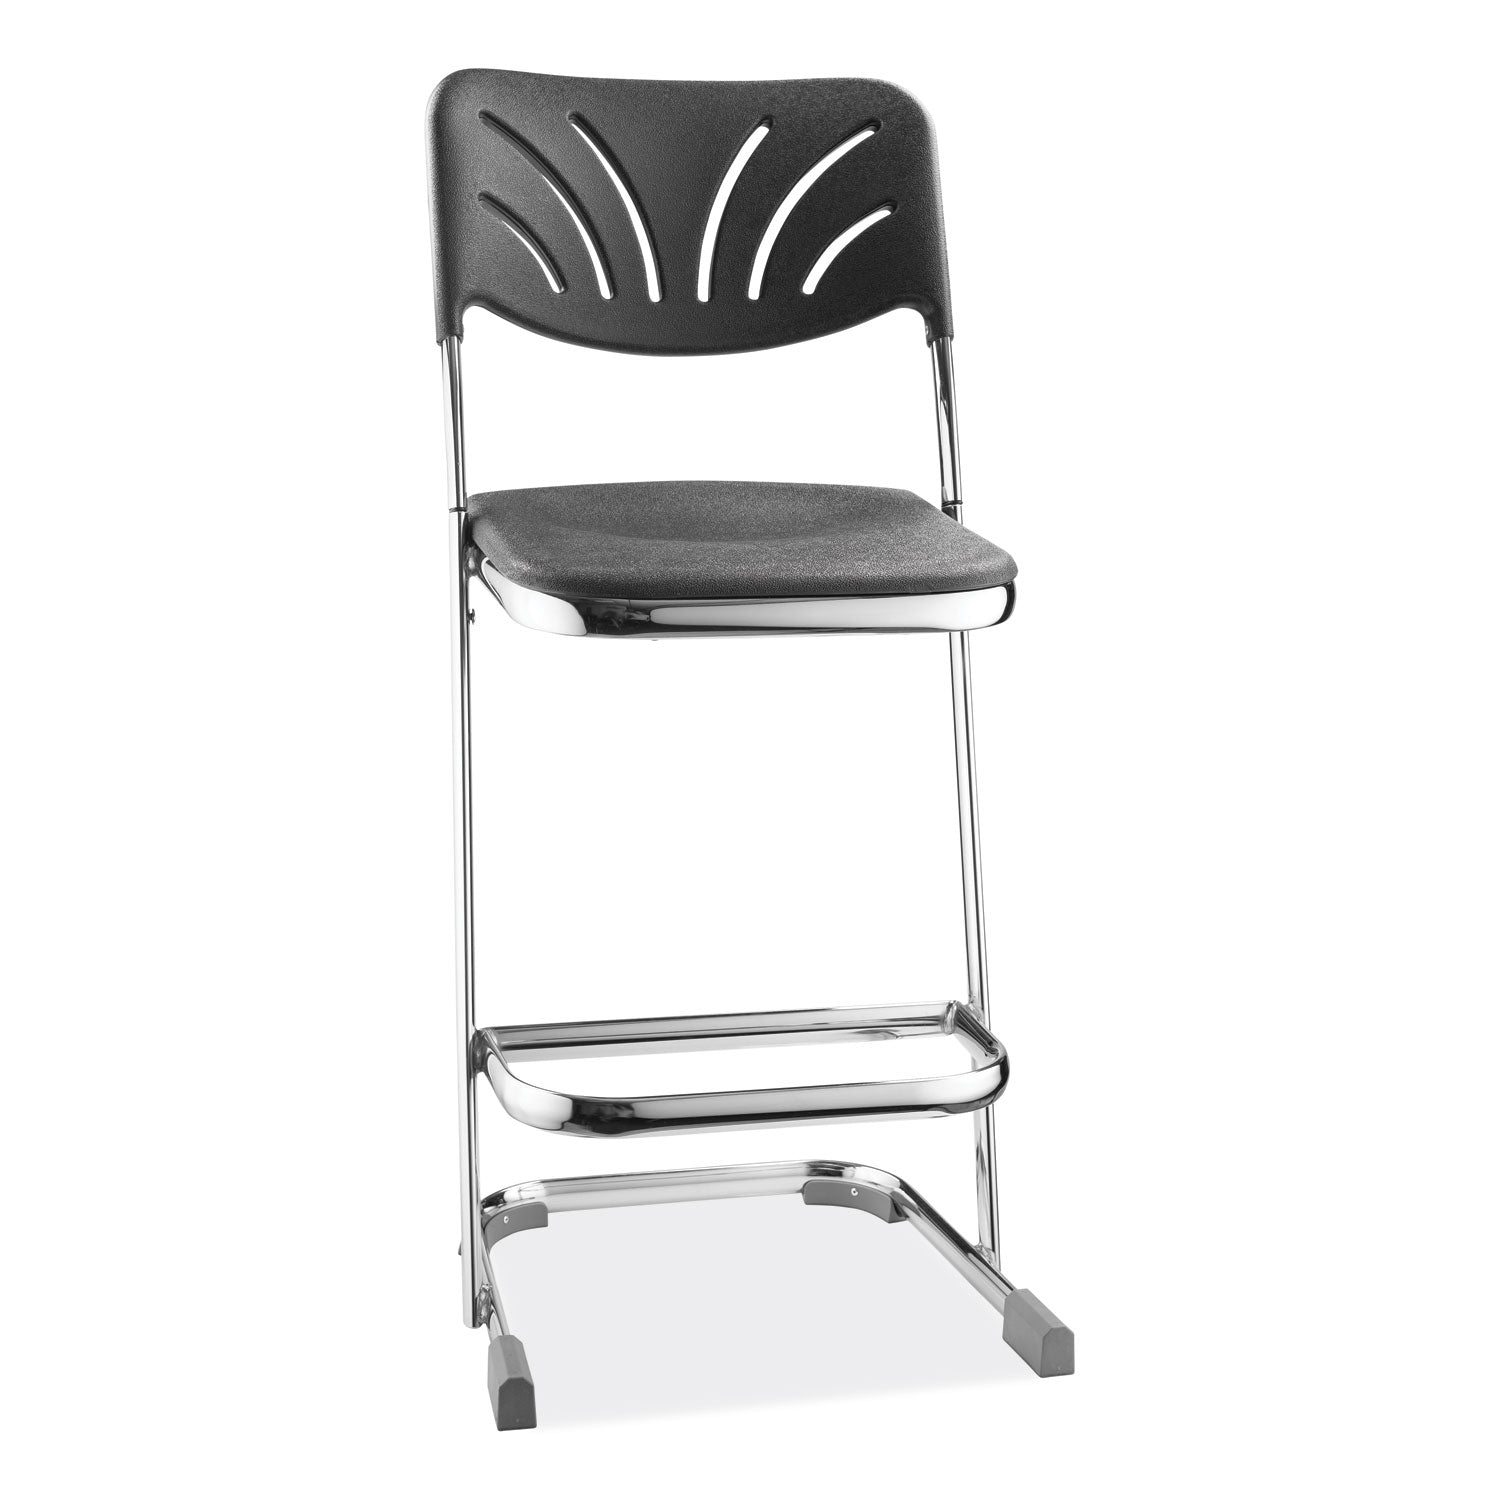 6600-series-elephant-z-stool-with-backrest-supports-500-lb-24-seat-ht-black-seat-back-chrome-frameships-in-1-3-bus-days_nps6624b - 1